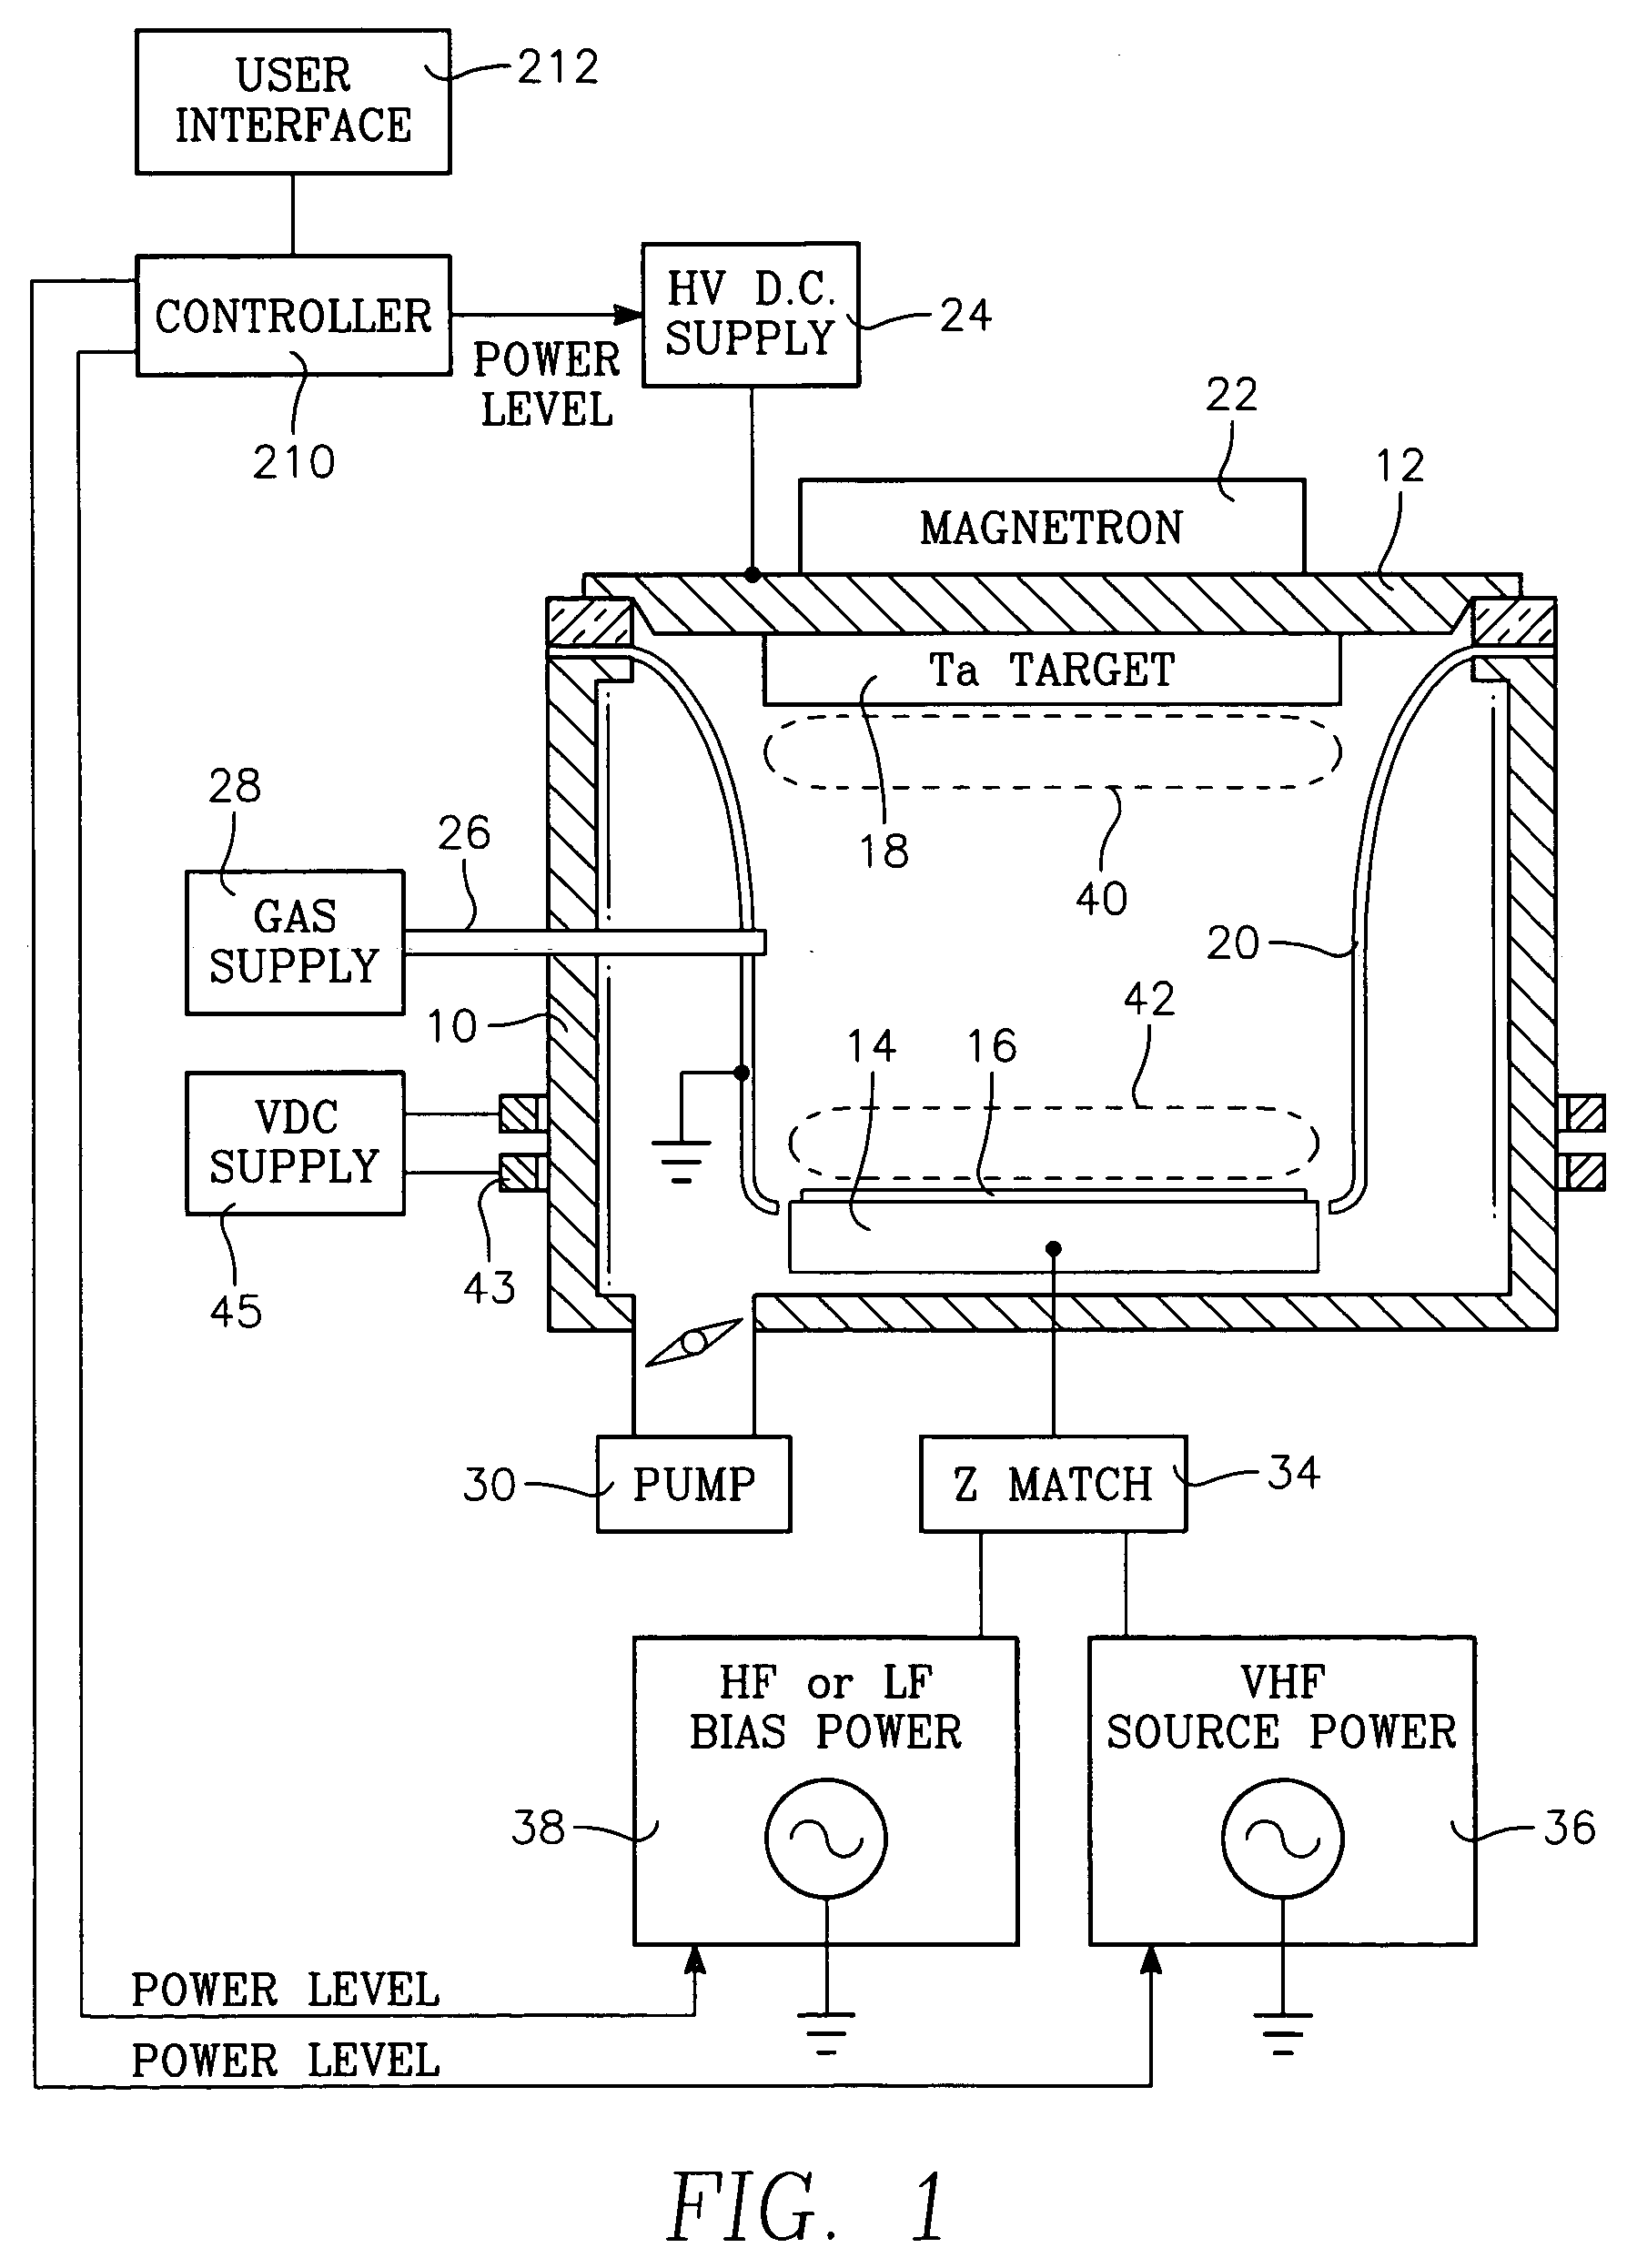 Apparatus for plasma-enhanced physical vapor deposition of copper with RF source power applied through the workpiece with a lighter-than-copper carrier gas